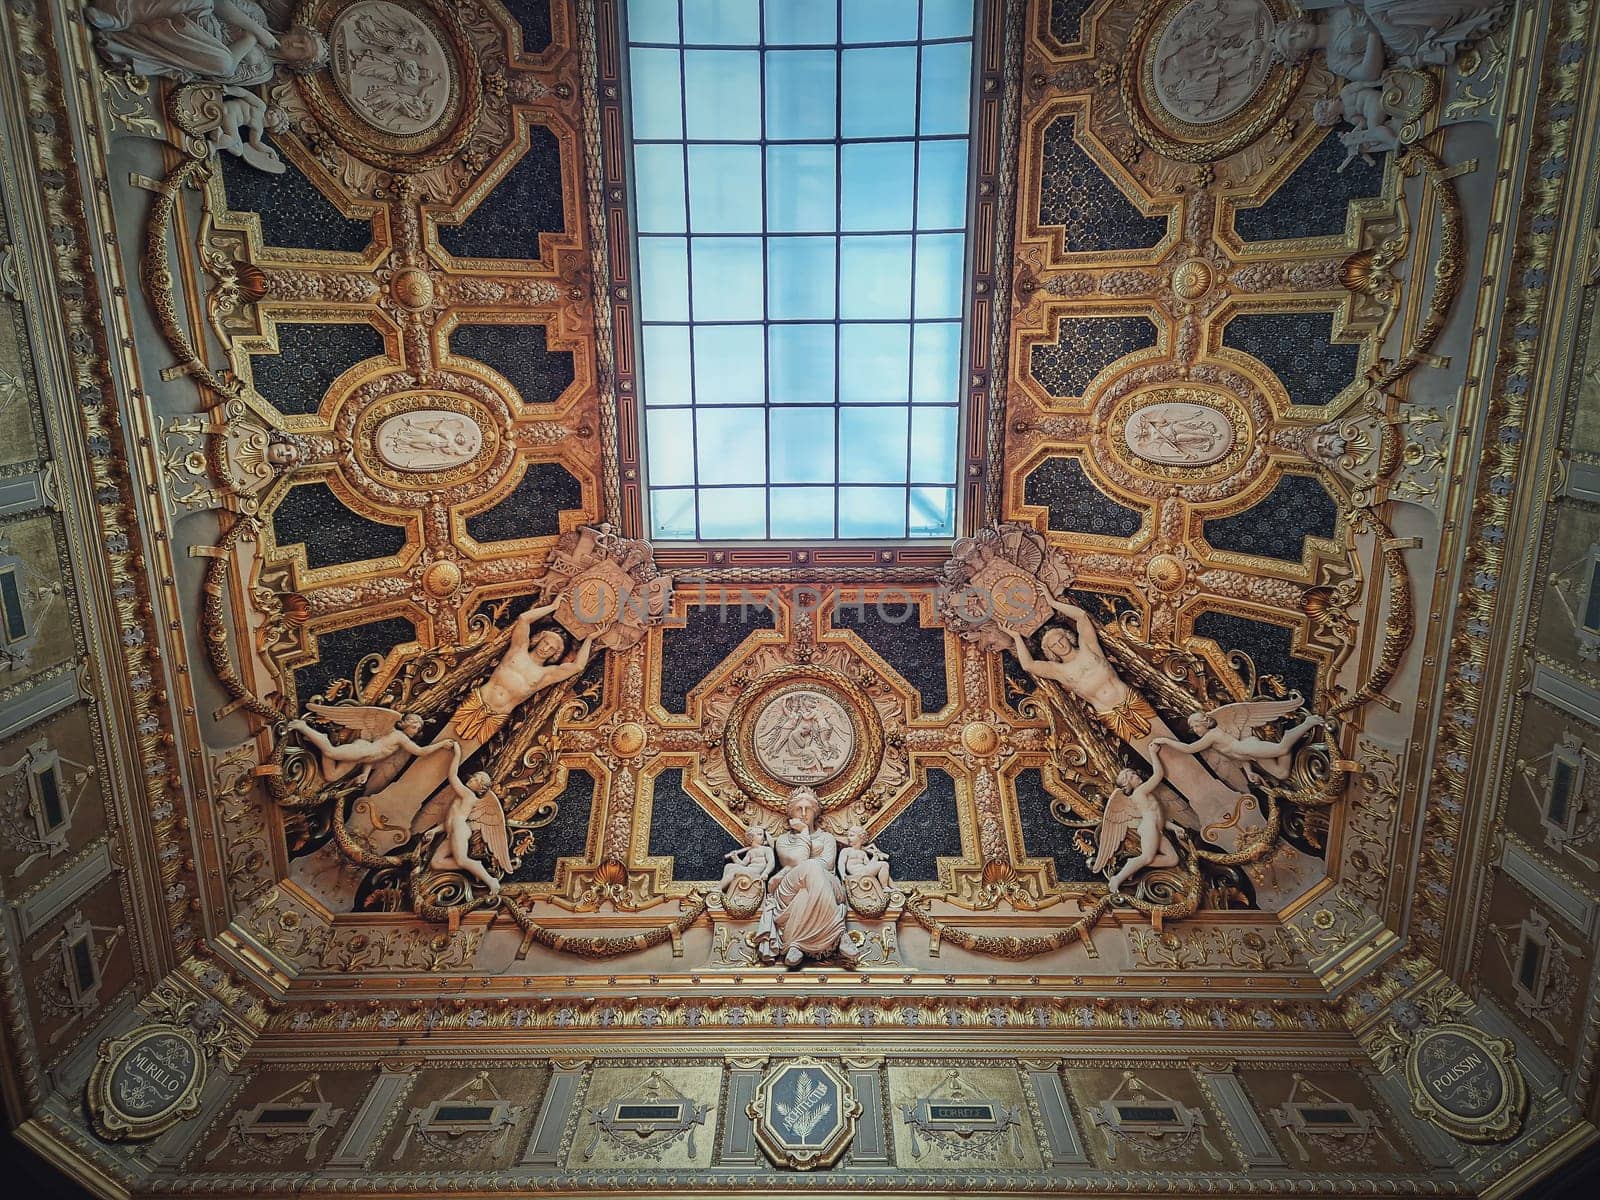 Golden ceiling with architectural details of the Salon Carre inside Louvre museum, Paris, France. Gilded ornaments with sculptures dedicated to Murillo and Poussin by psychoshadow